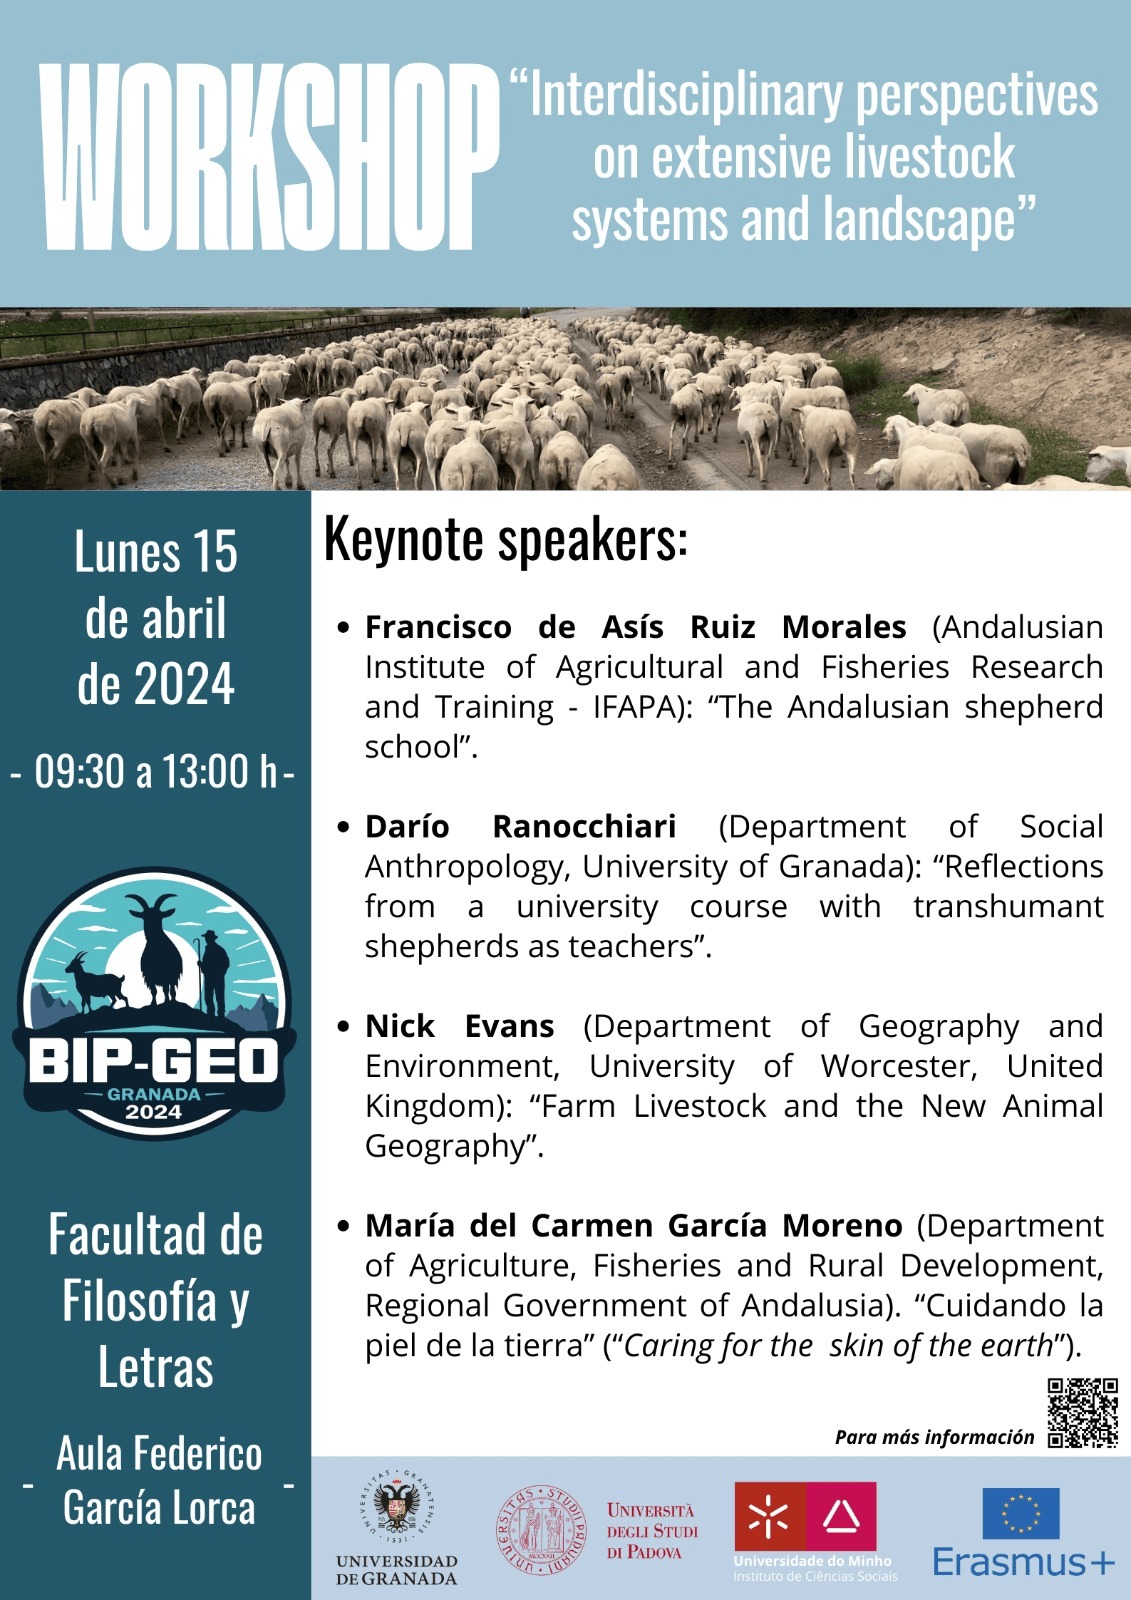 Workshop "Interdisciplinary perspectives on extensive livestock systems and landscape"